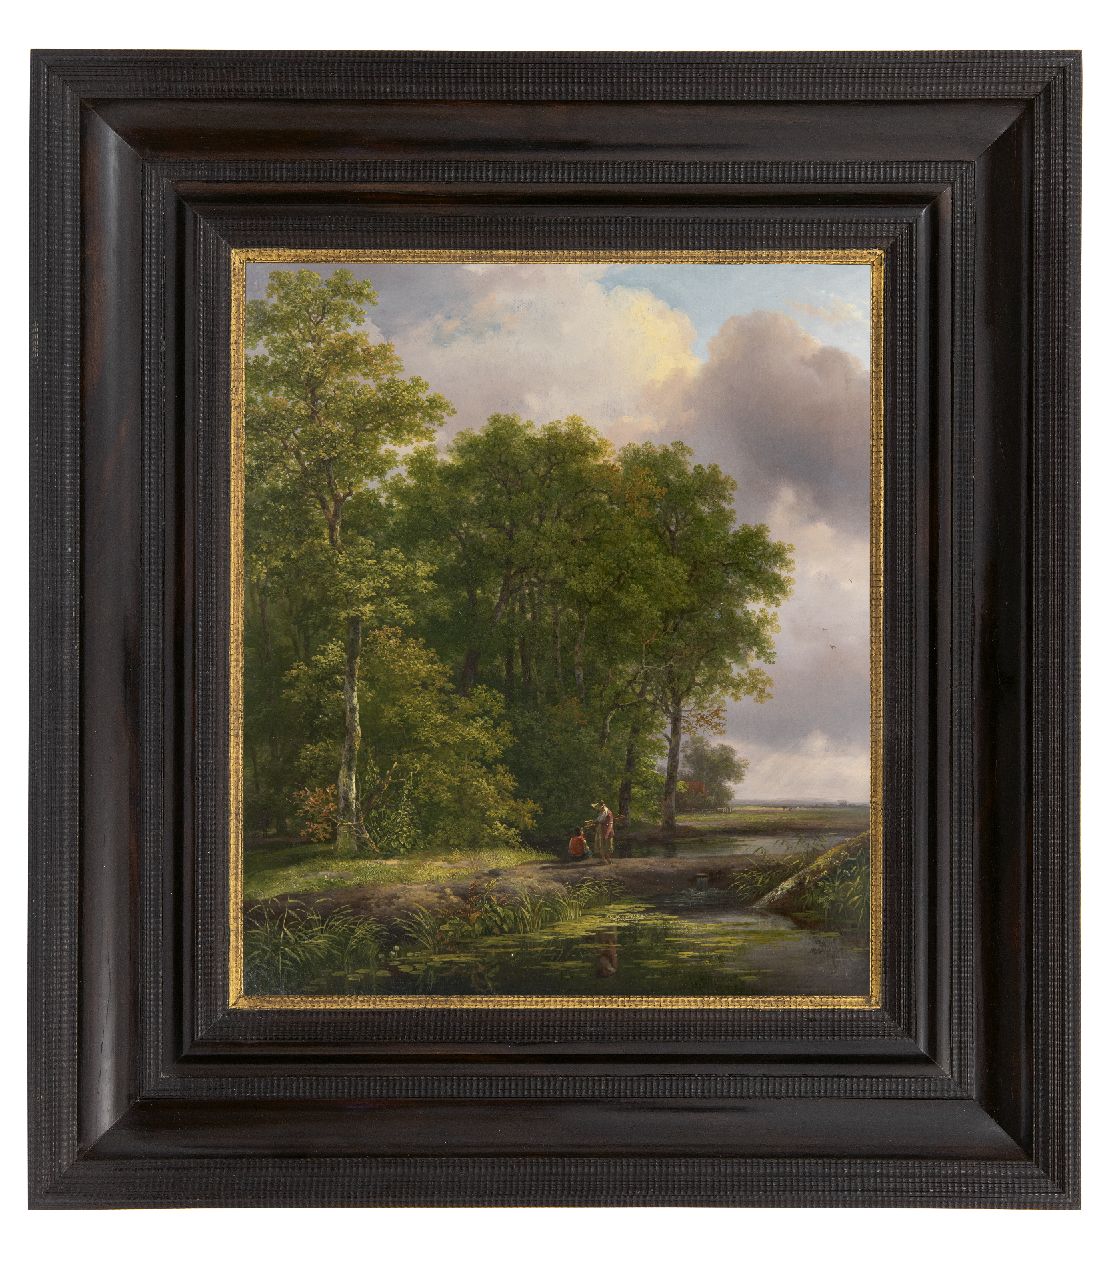 Schelfhout A.  | Andreas Schelfhout | Paintings offered for sale | Landfolk on a wooded path, oil on panel 40.8 x 34.2 cm, signed l.l. with initials